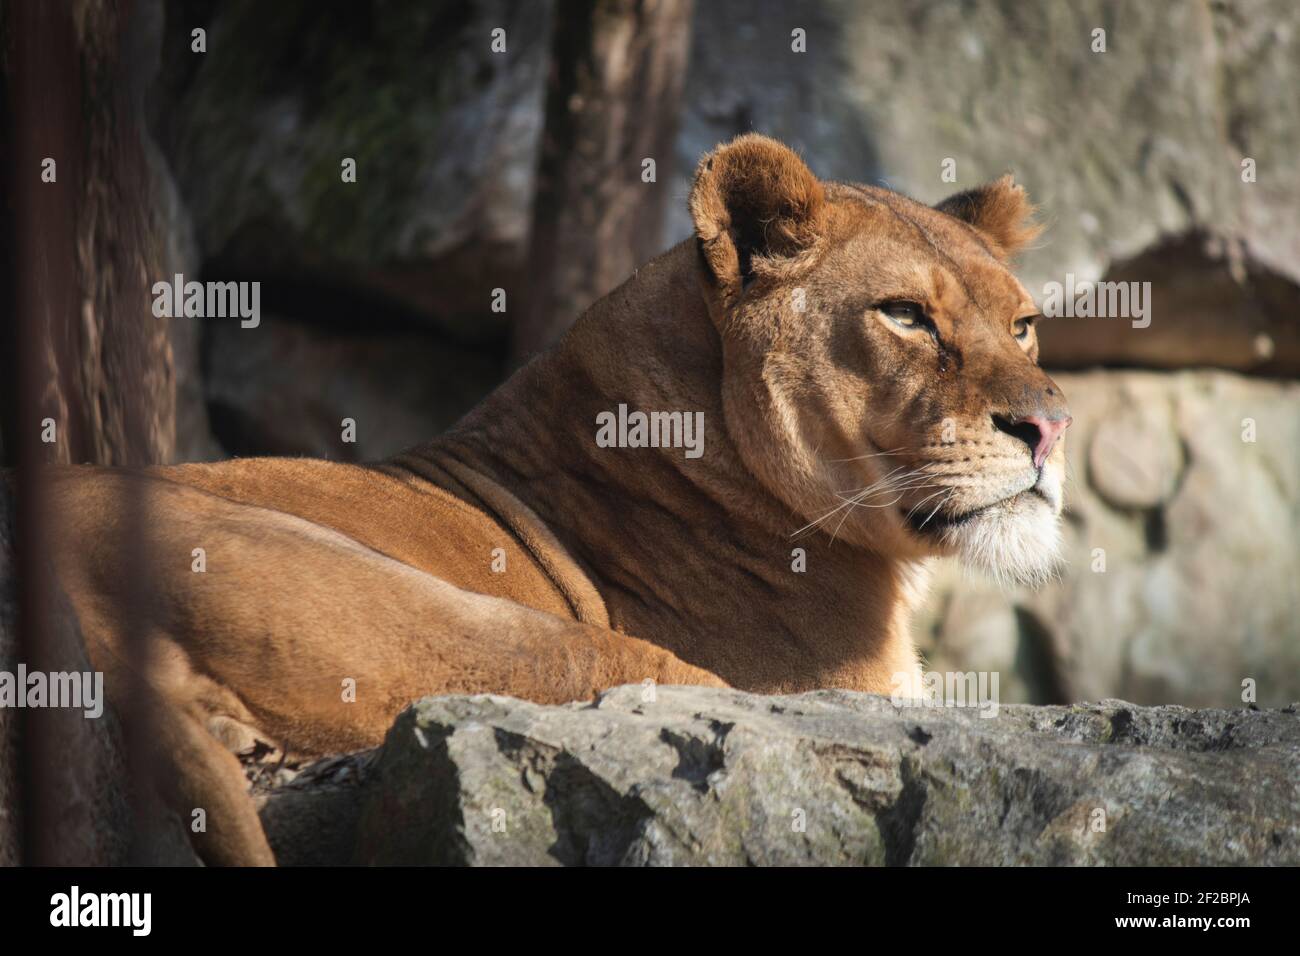 A lioness, the queen of the forest, photo taken in Cornelle zoo near Bergamo, Italy. Stock Photo